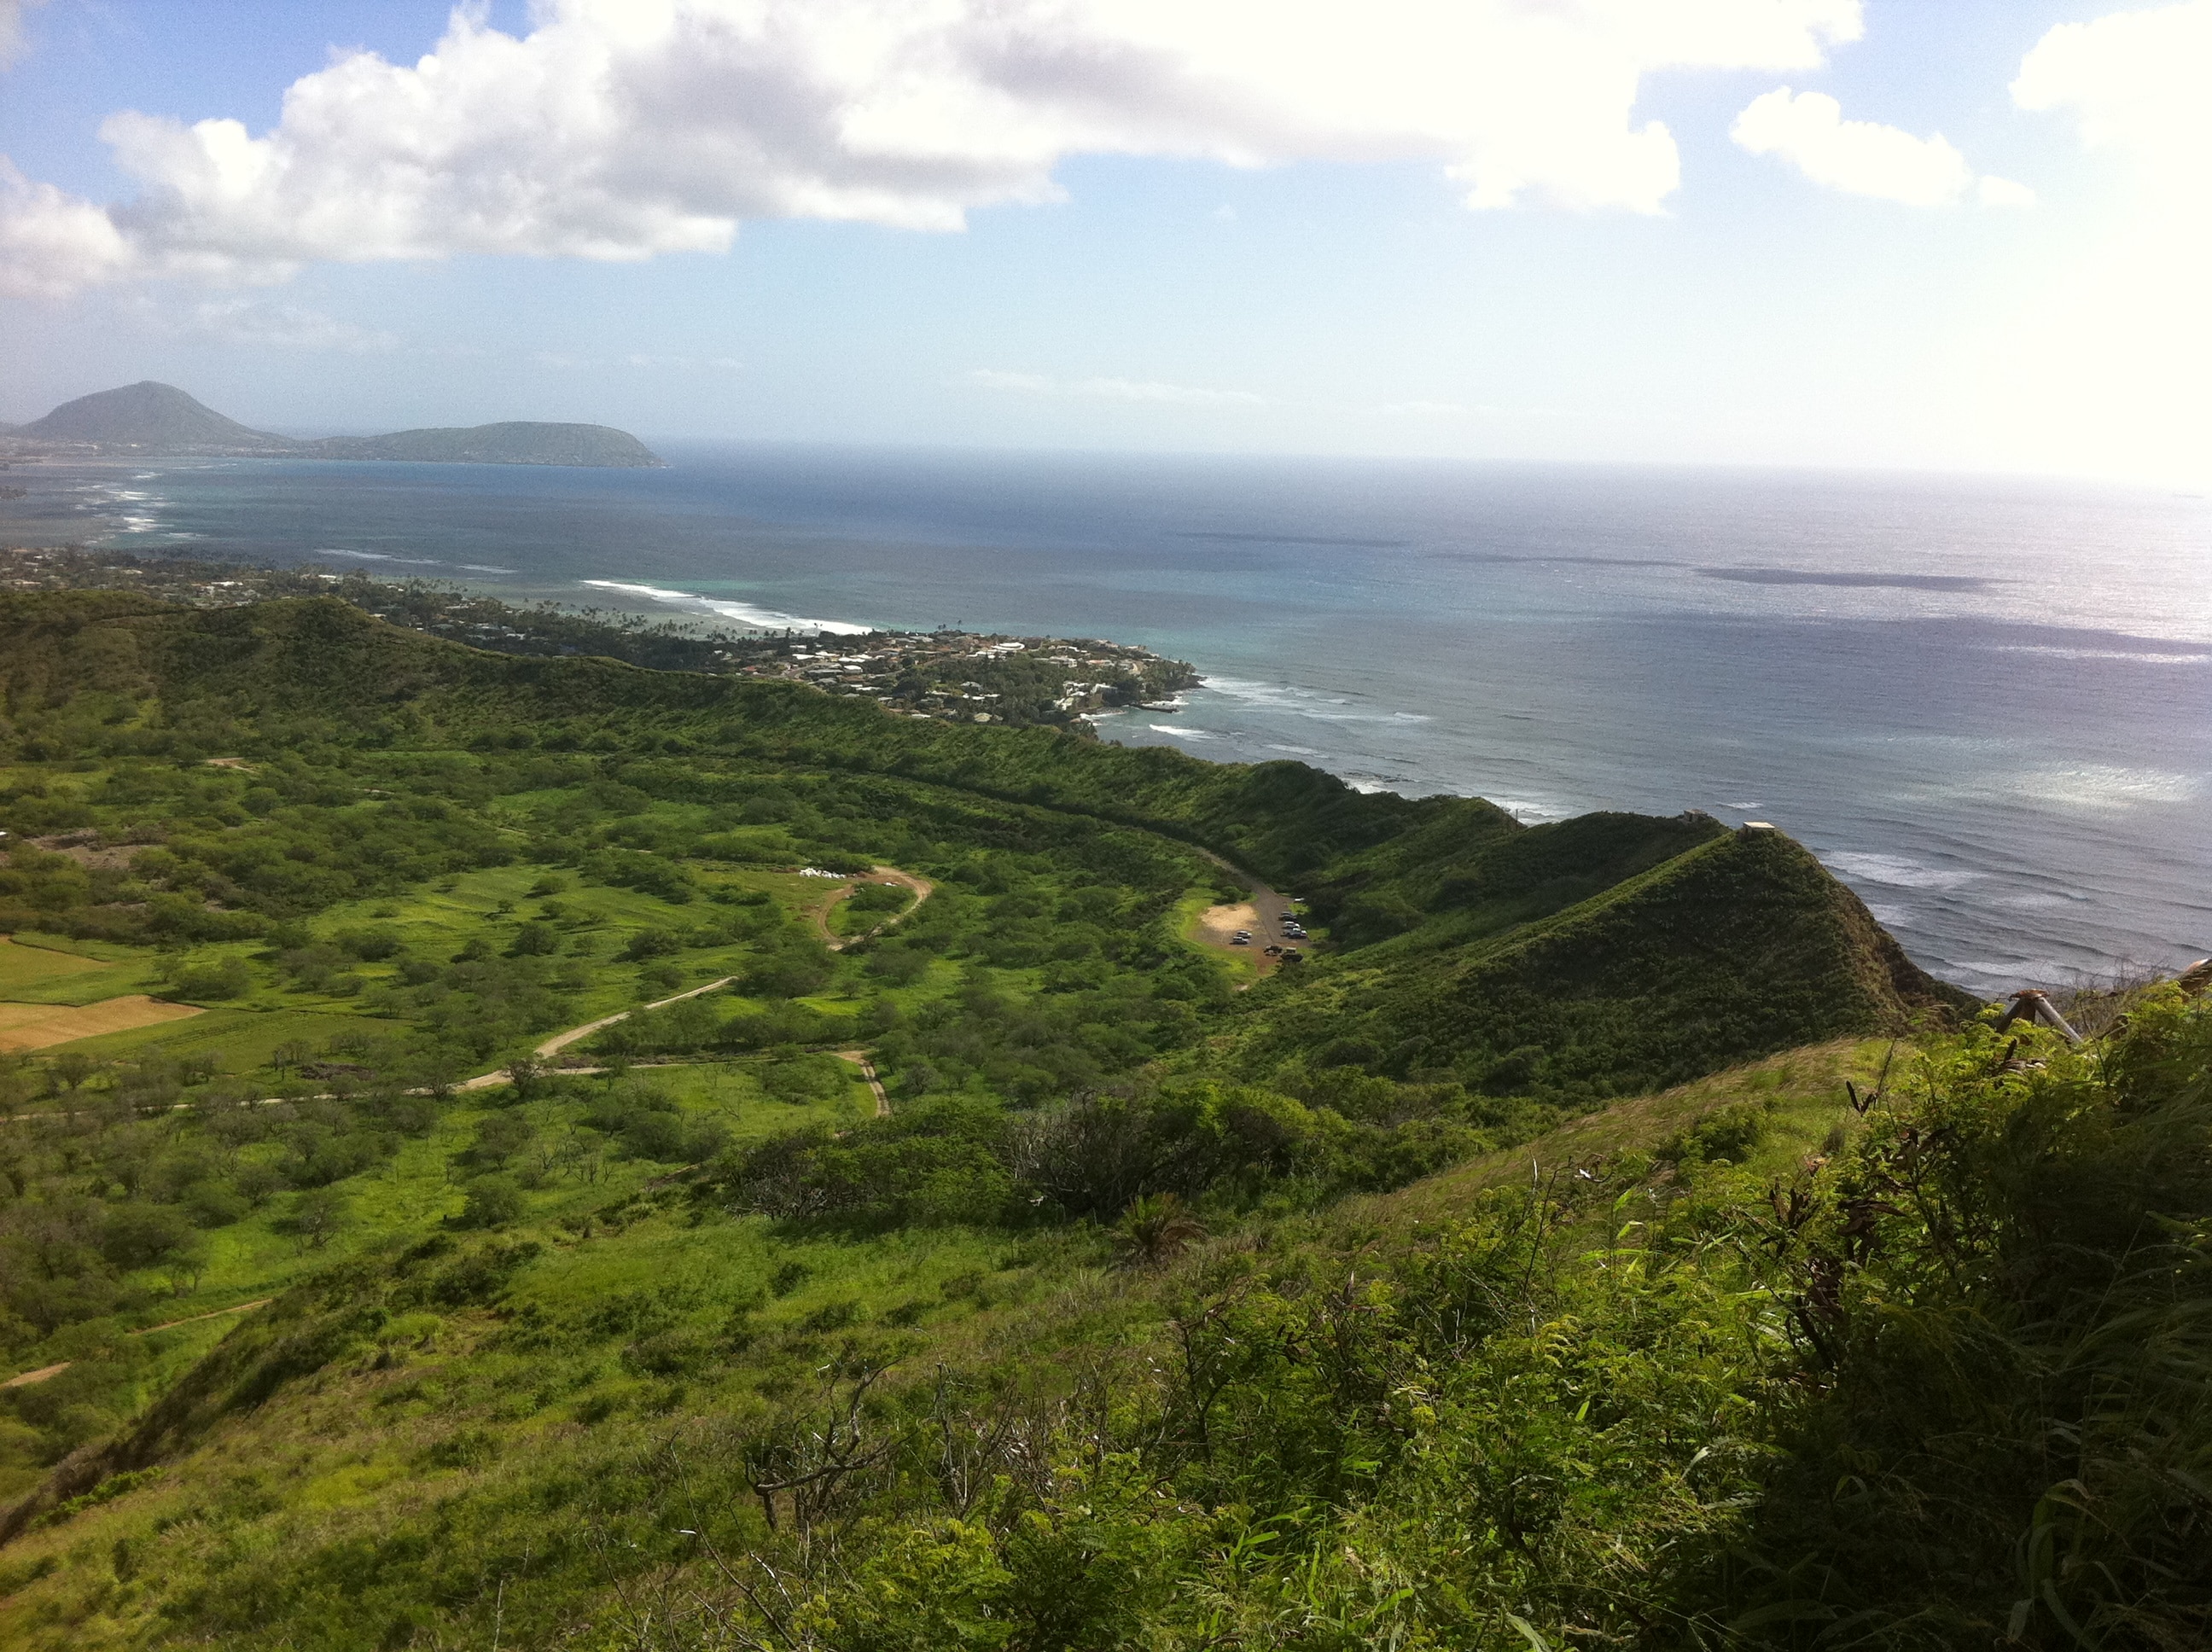 My Trip to Hawaii – Adventures of a Homebased Business Entrepreneur